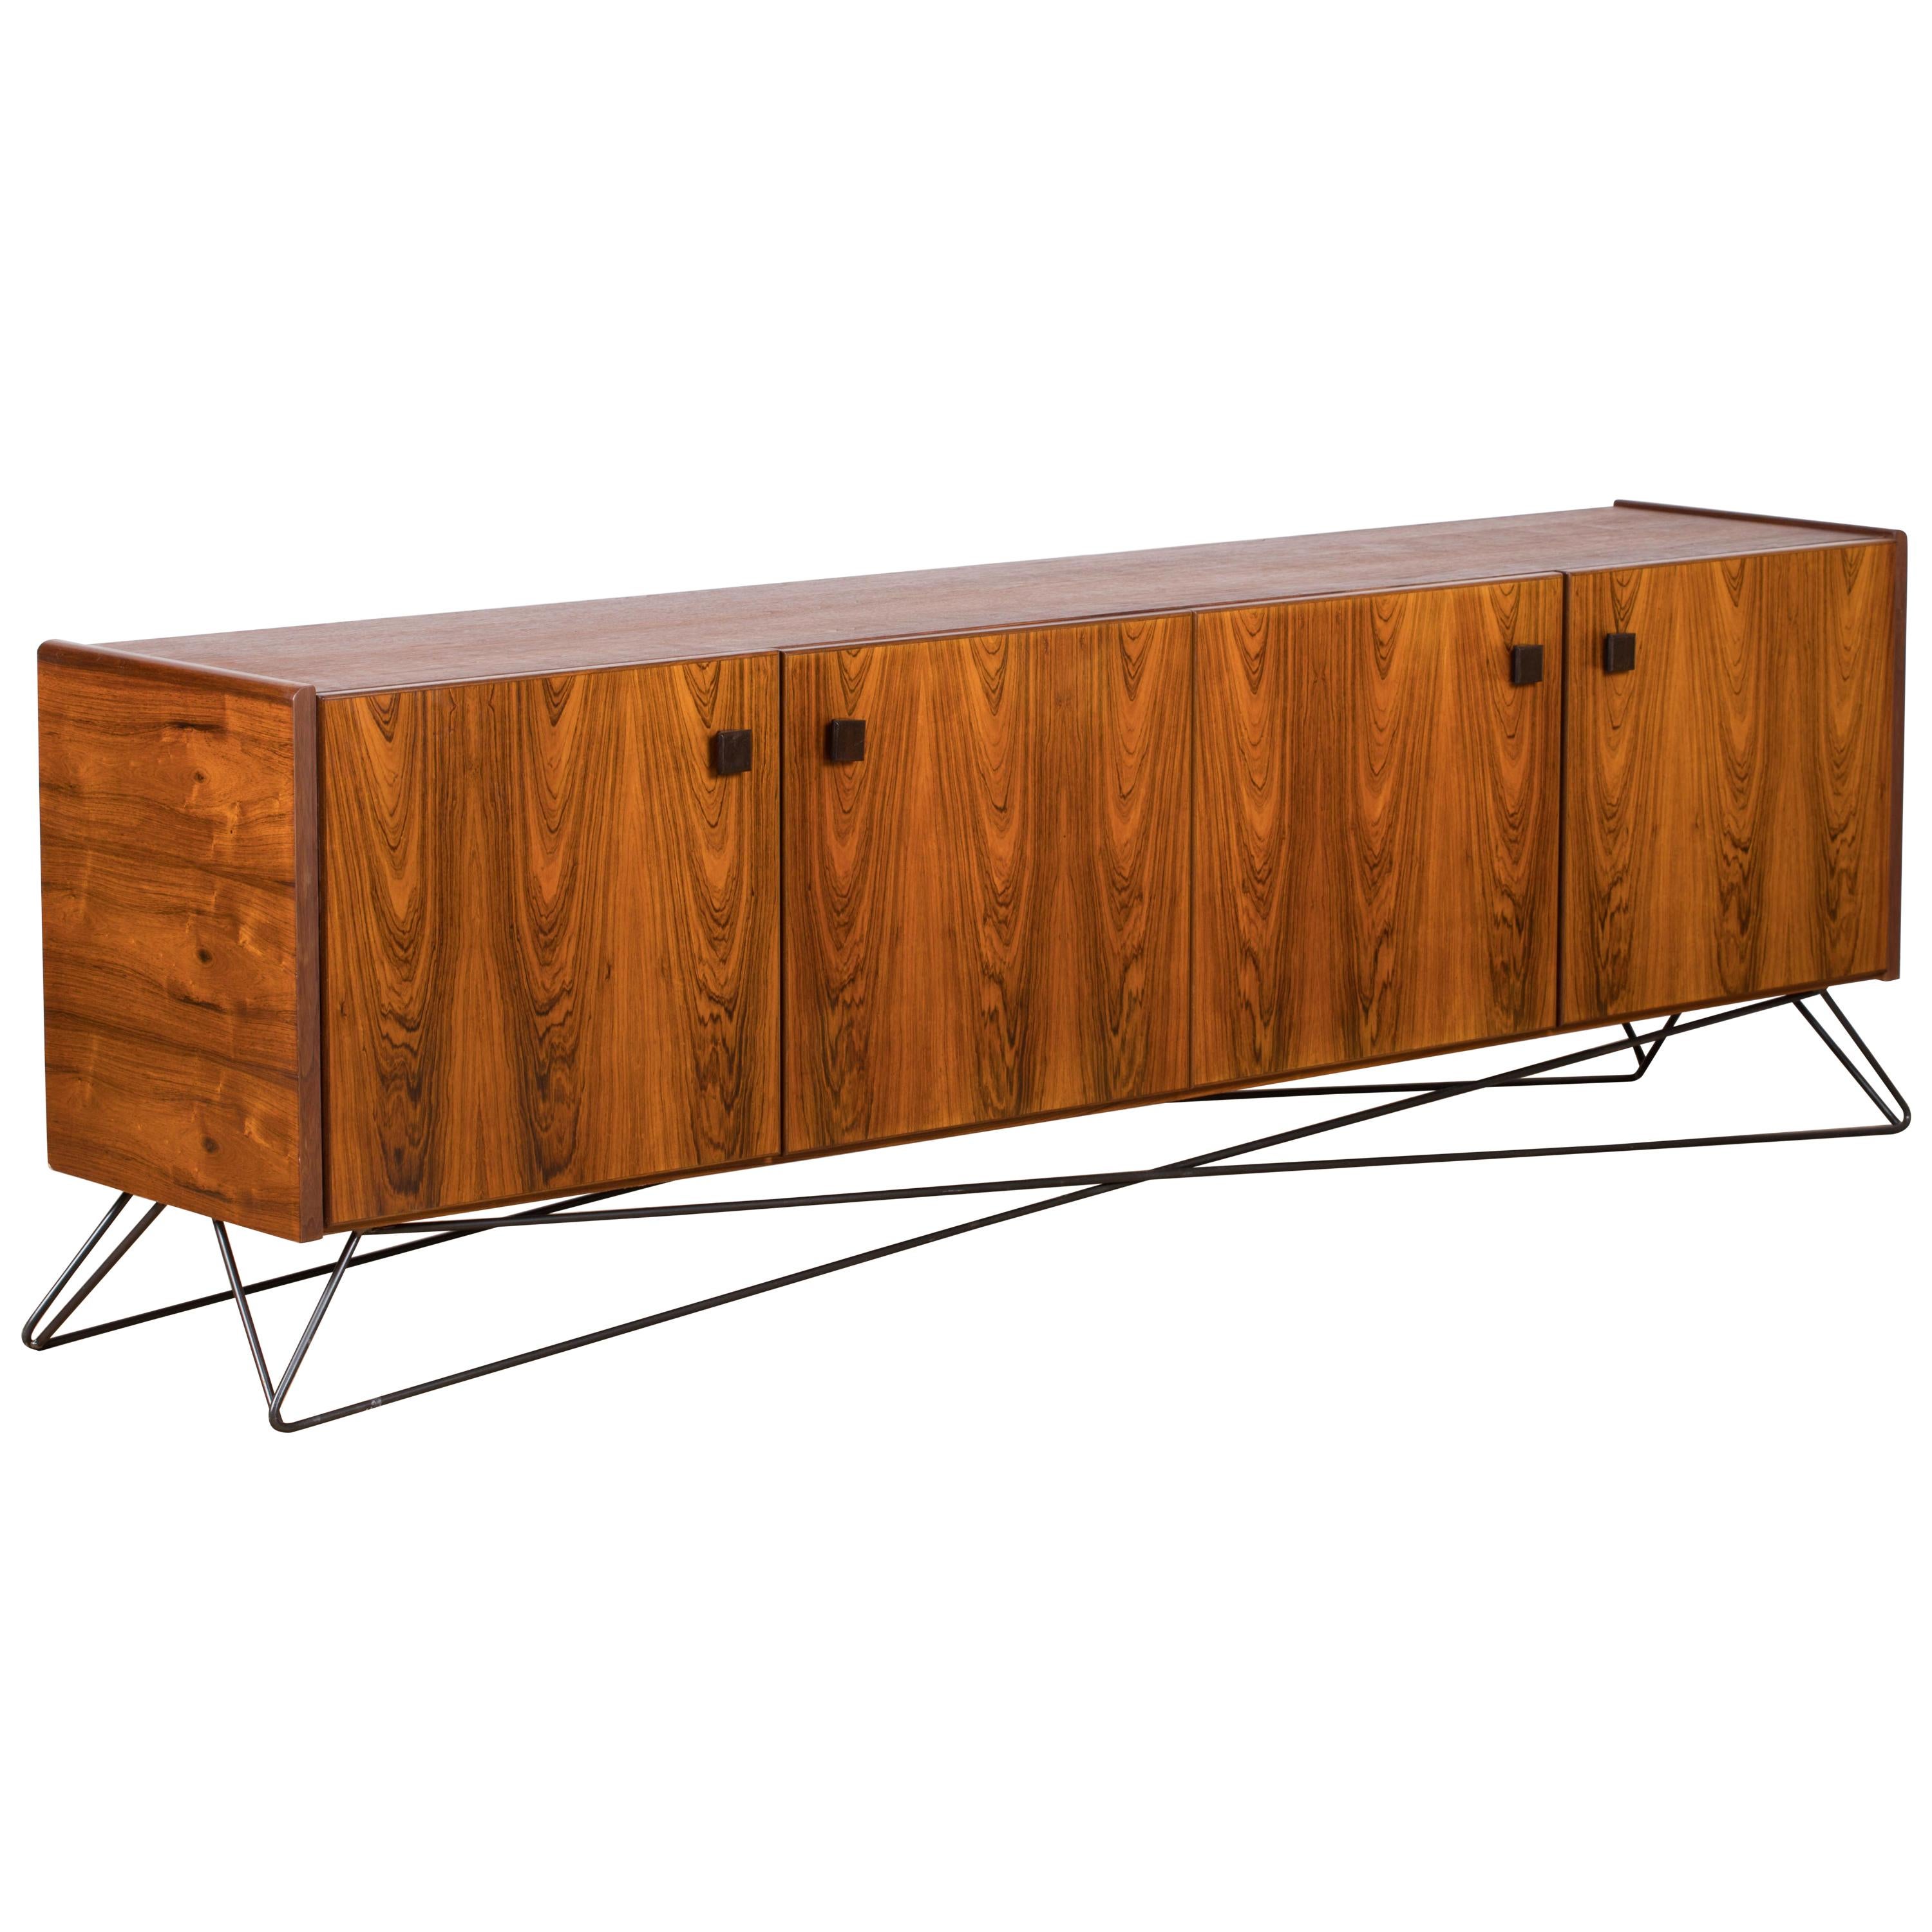 Midcentury walnut sideboard / Buffet from the 1960s. It is a shining example of the form and function synonymous with furniture of this era. It has is all, well-built, great design and heaviness. Two large storage spaces. The minimal design and the